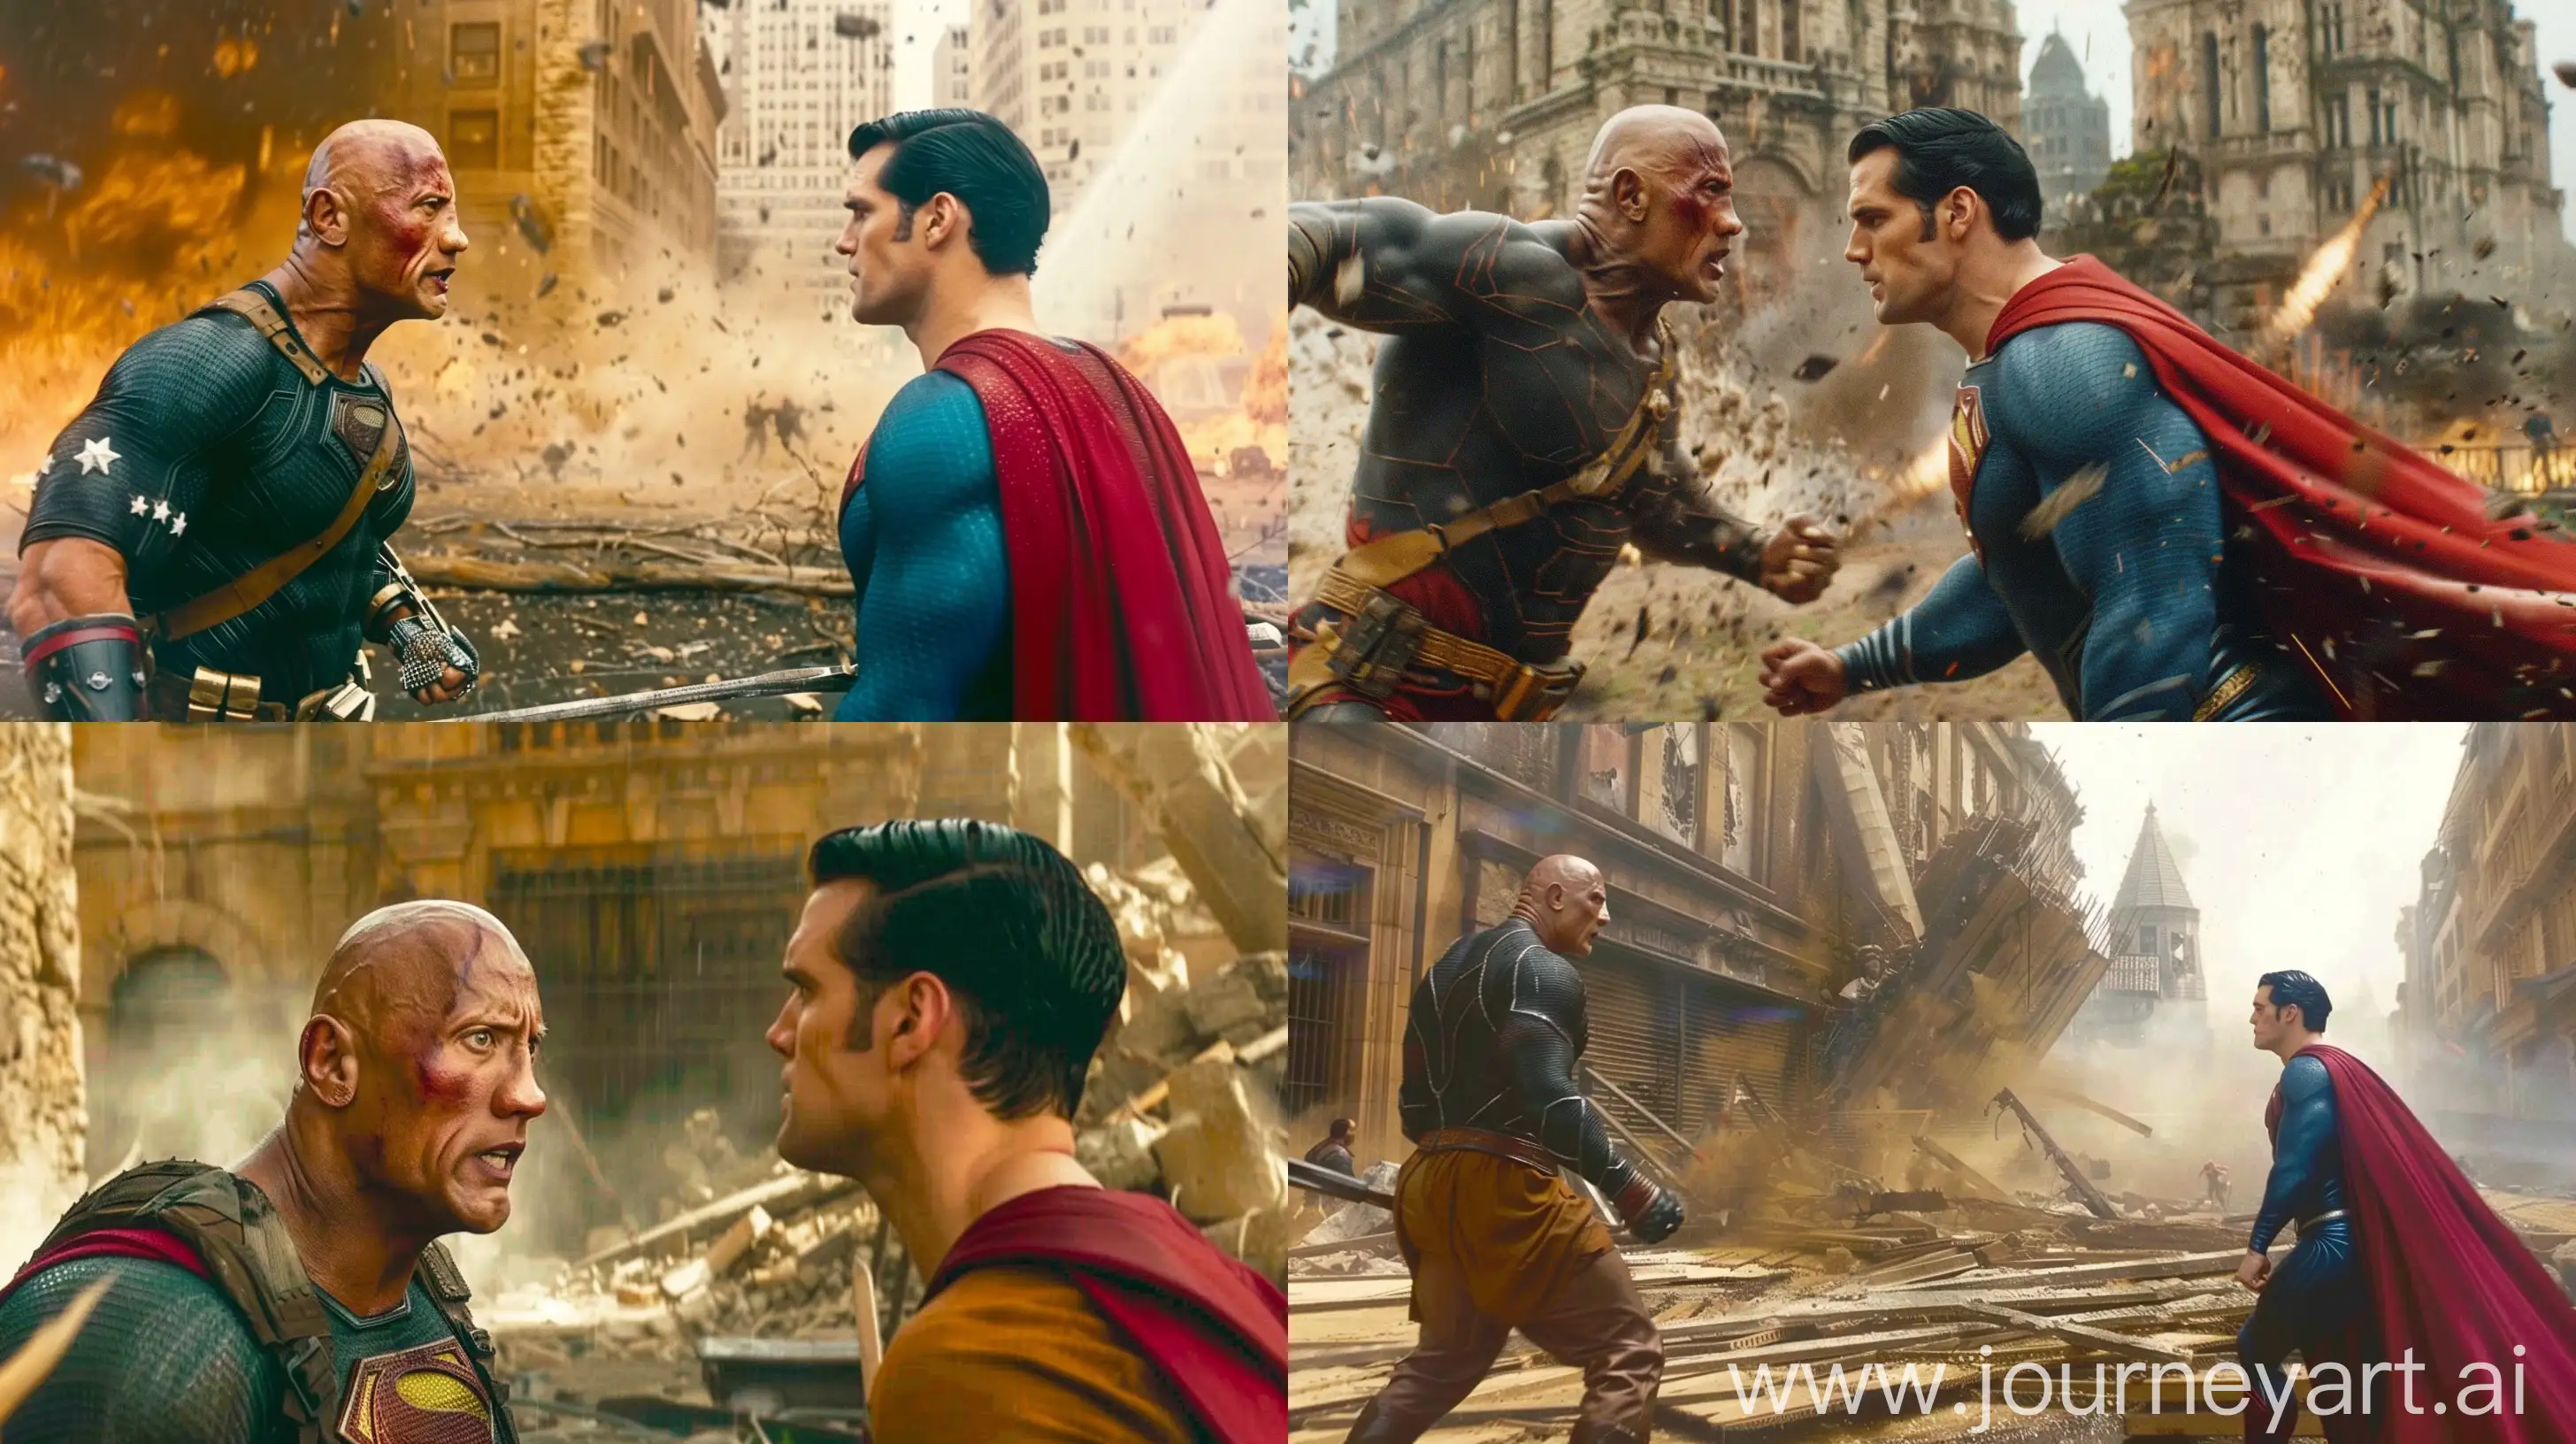 Dwayne johnson wearing as black adam facing Henry cavill as man of steel in middle of battle with alotof buildings are destroyed, mid camera angle with cinematic full body high quality action film,   UHD 8K , --ar 16:9 --s 900 --w 500 --v 6.0 --stylize 750